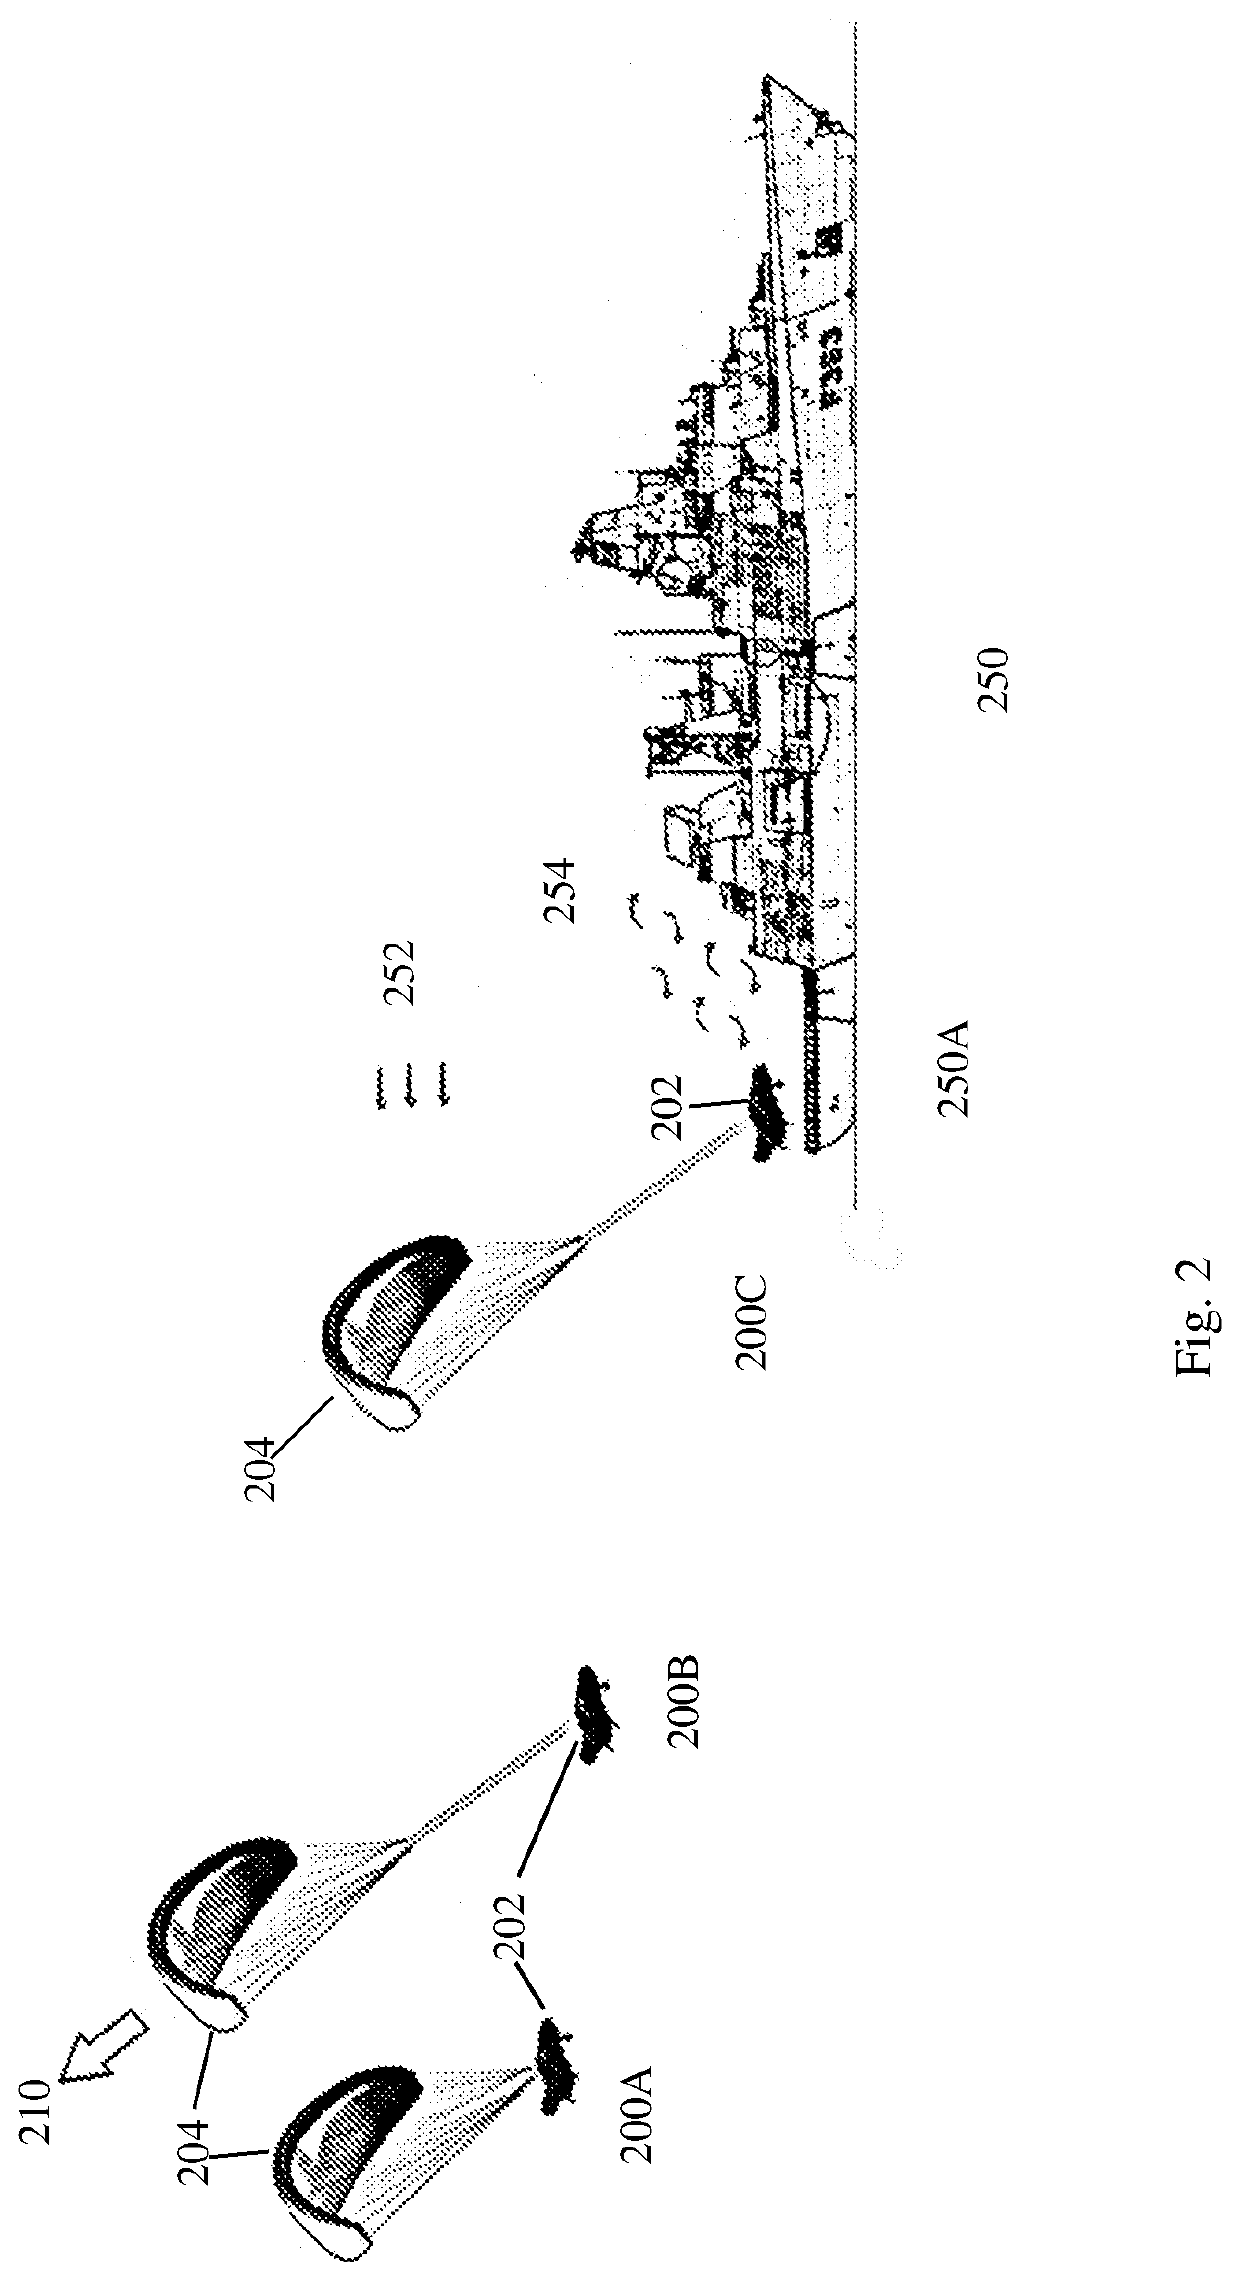 System and method for automated landing of a parachute-suspended body